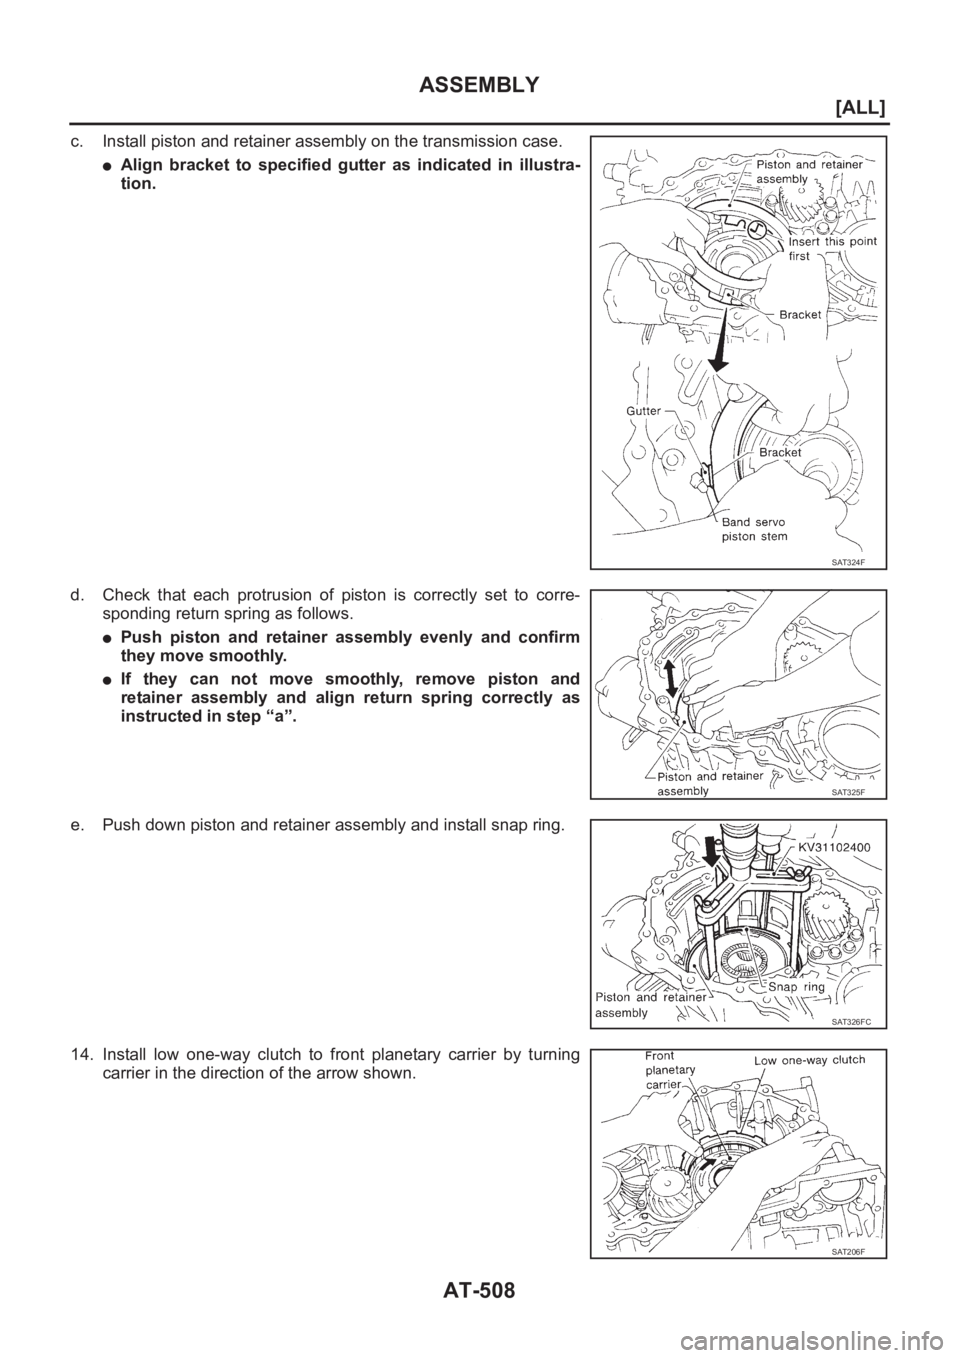 NISSAN X-TRAIL 2001  Service Repair Manual AT-508
[ALL]
ASSEMBLY
c. Install piston and retainer assembly on the transmission case.
●Align  bracket  to  specified  gutter  as  indicated  in  illustra-
tion.
d. Check  that  each  protrusion  o